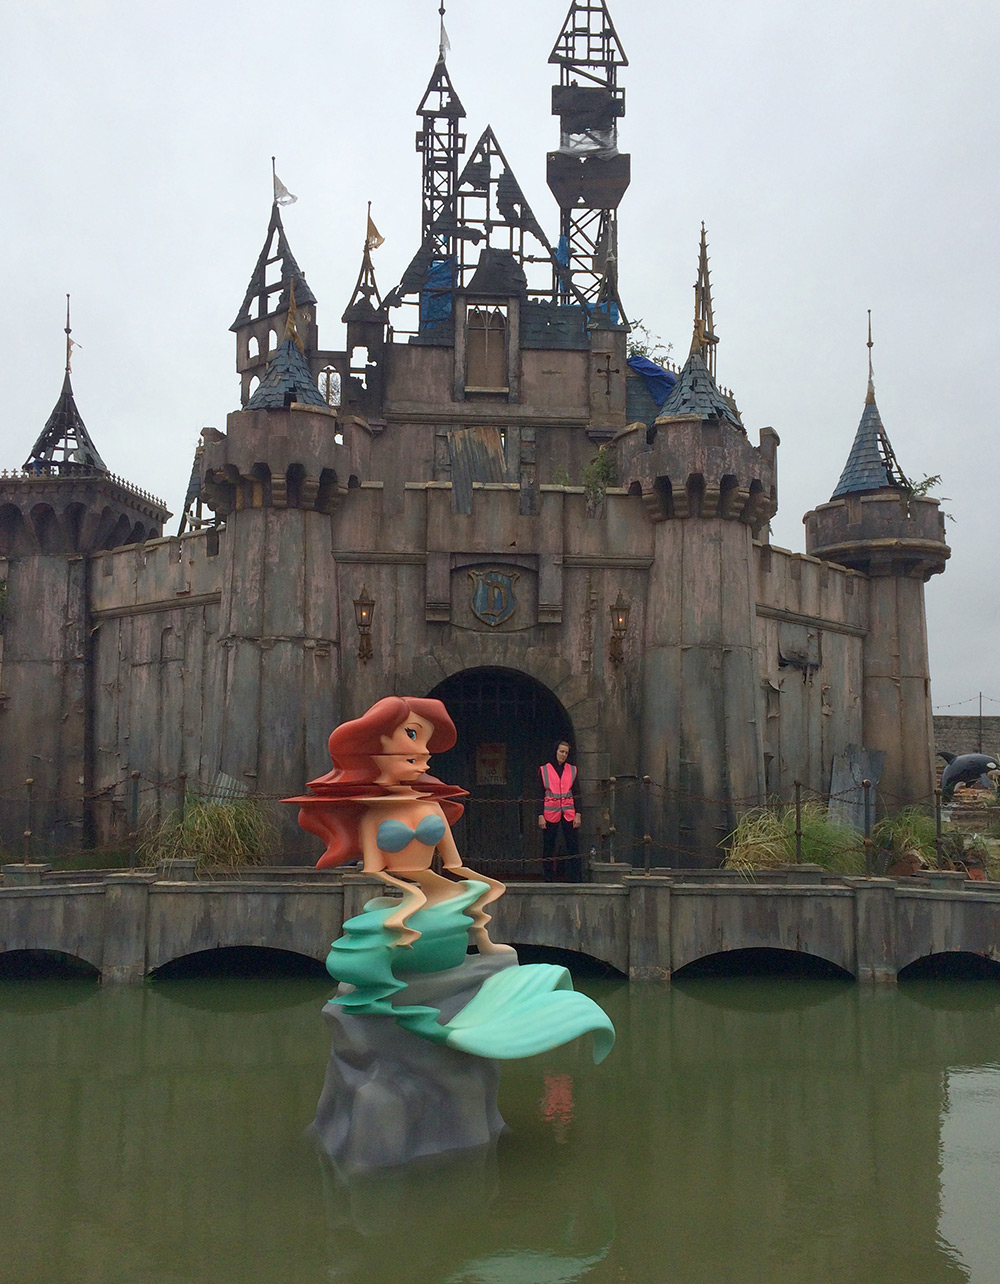 Street-Art-by-Banksy-and-other-artists-in-London-England-Dismaland-2.jpg